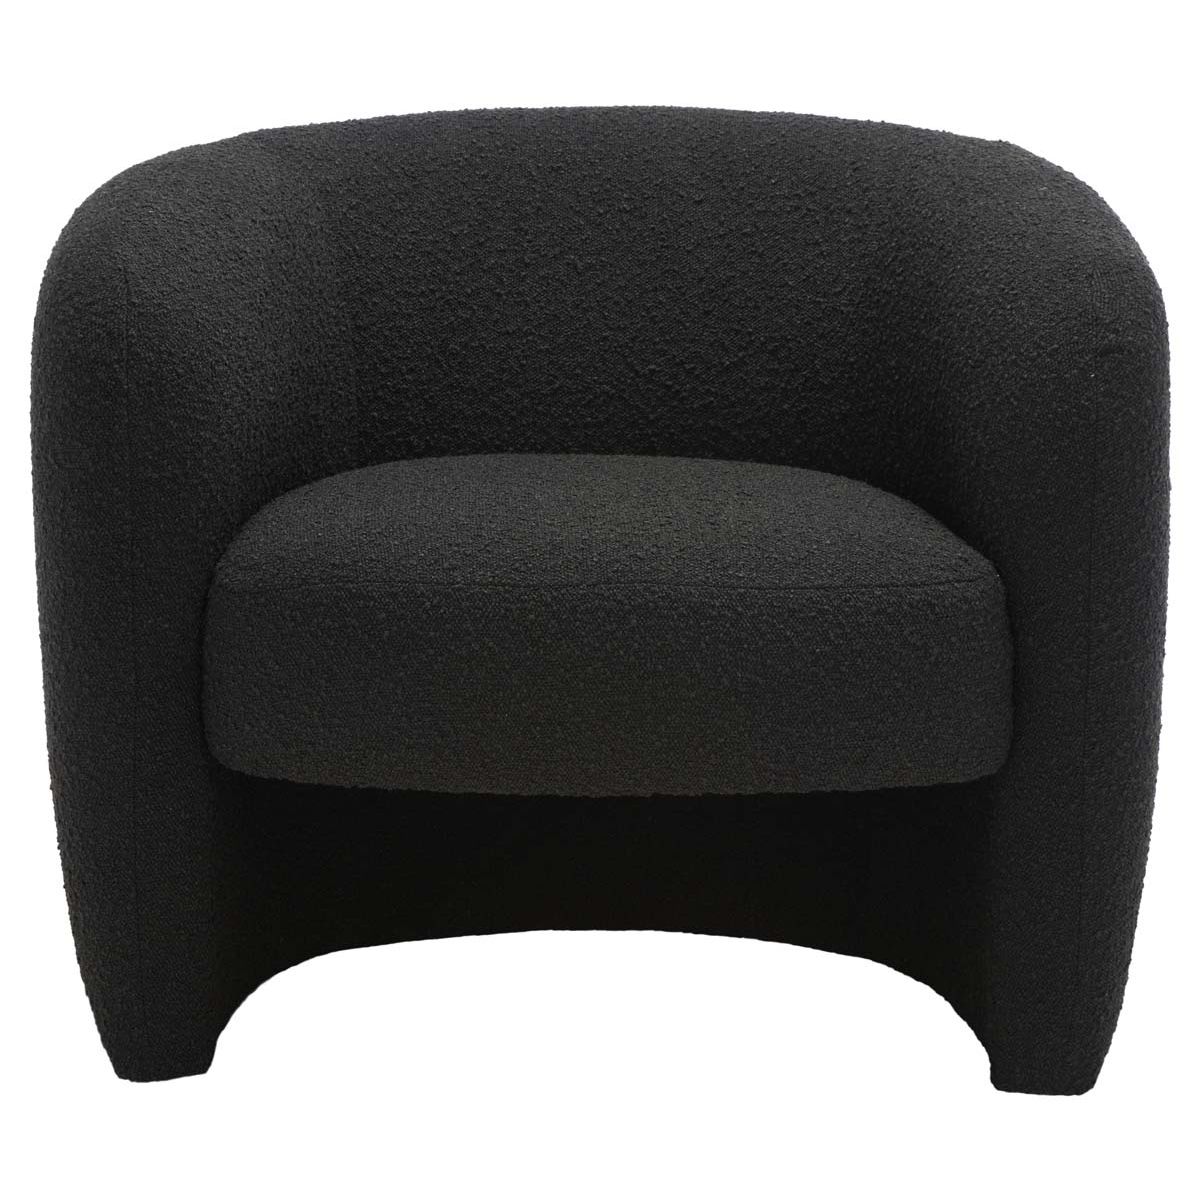 Safavieh Couture Everly Barrel Back Accent Chair